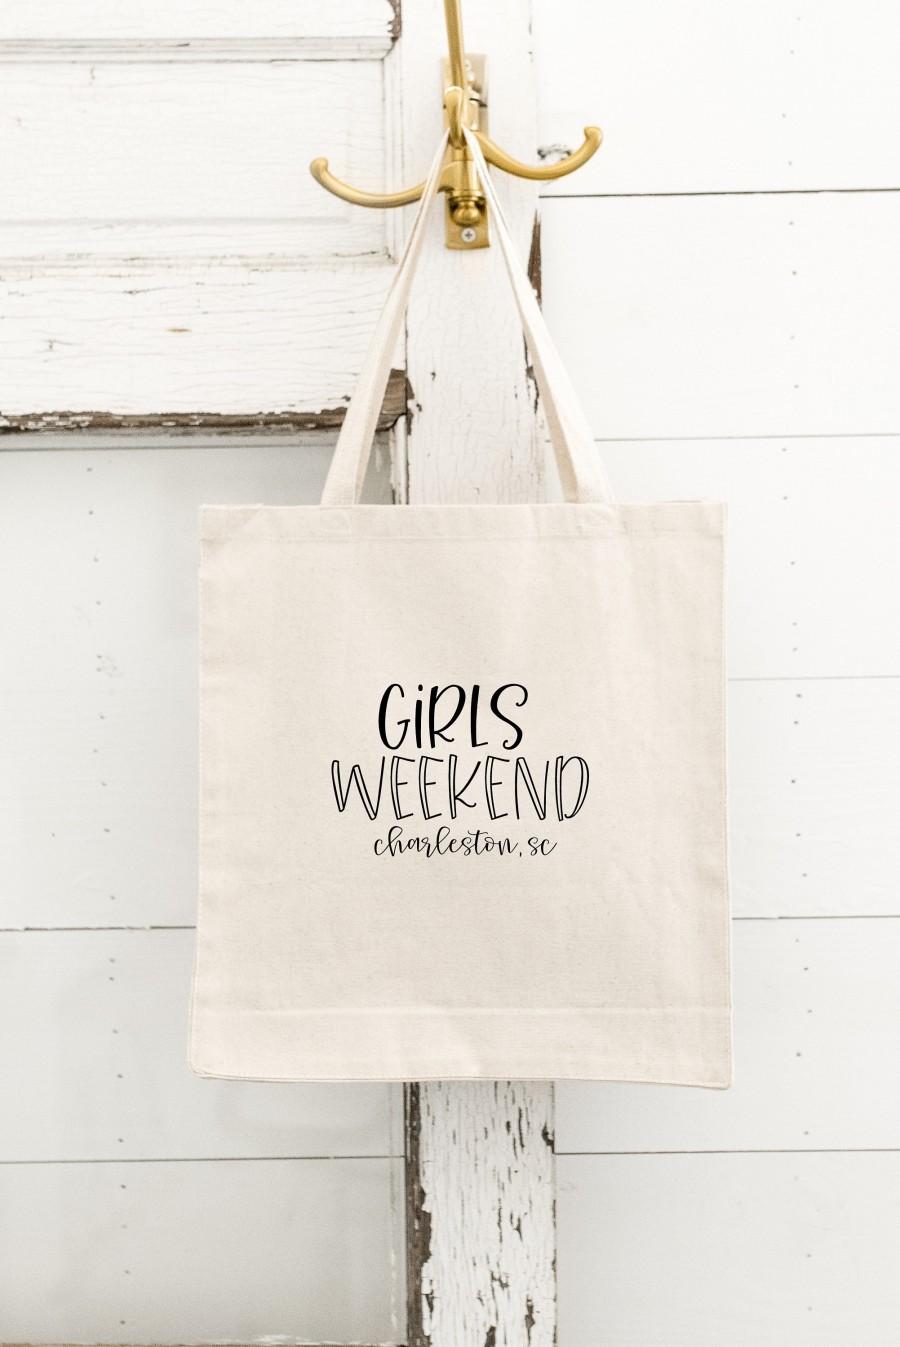 Mariage - Girls Weekend Tote with Location - Girls Wknd - Weekend Tote - Girls Getaway - Girls Trip - Gift - Tote Bag - Weekend Trip - Girls Weekend